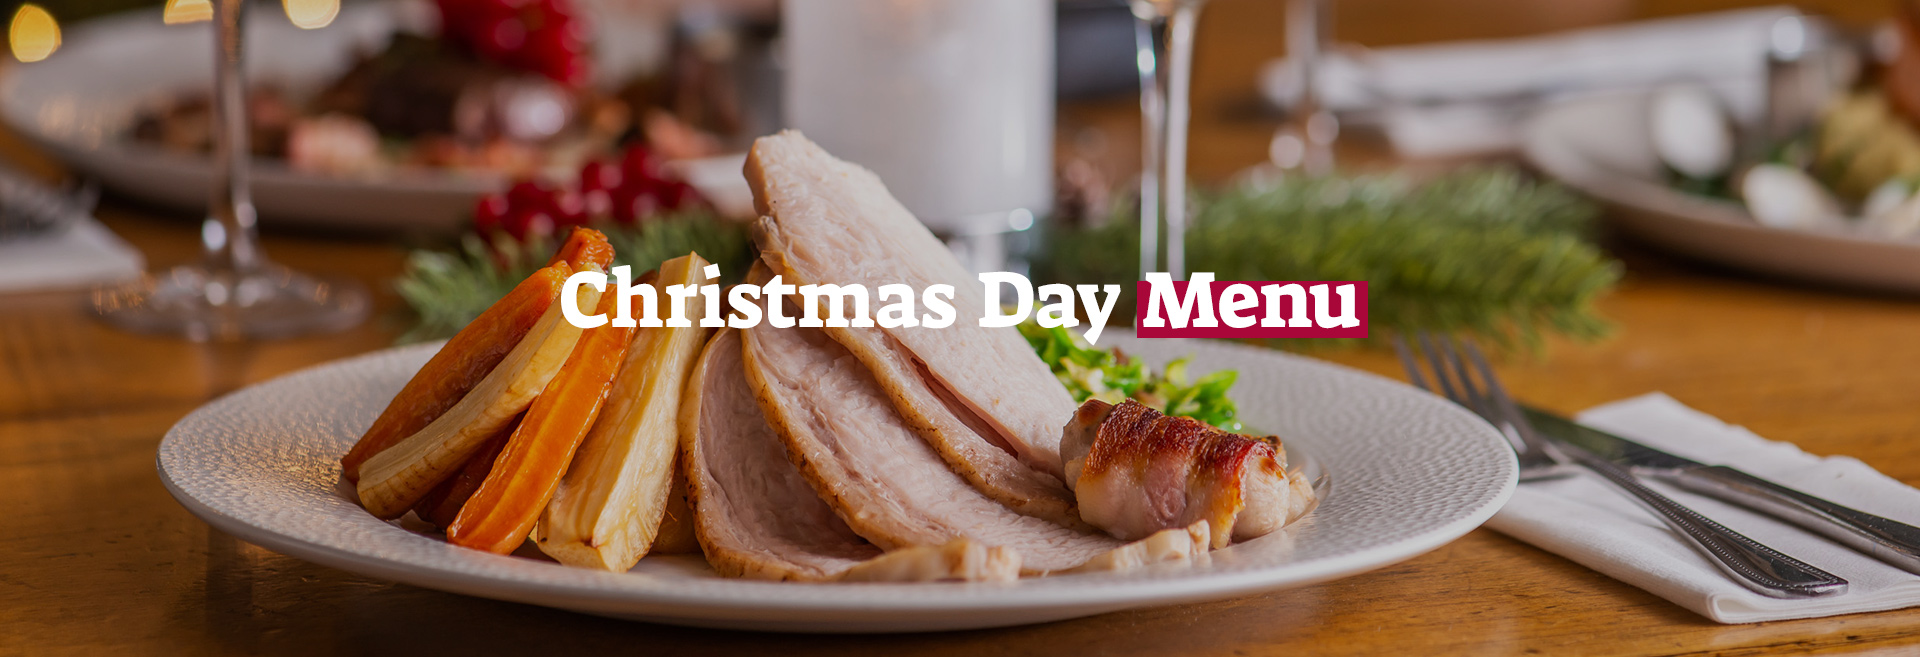 Christmas Day Menu at The Forth Hotel